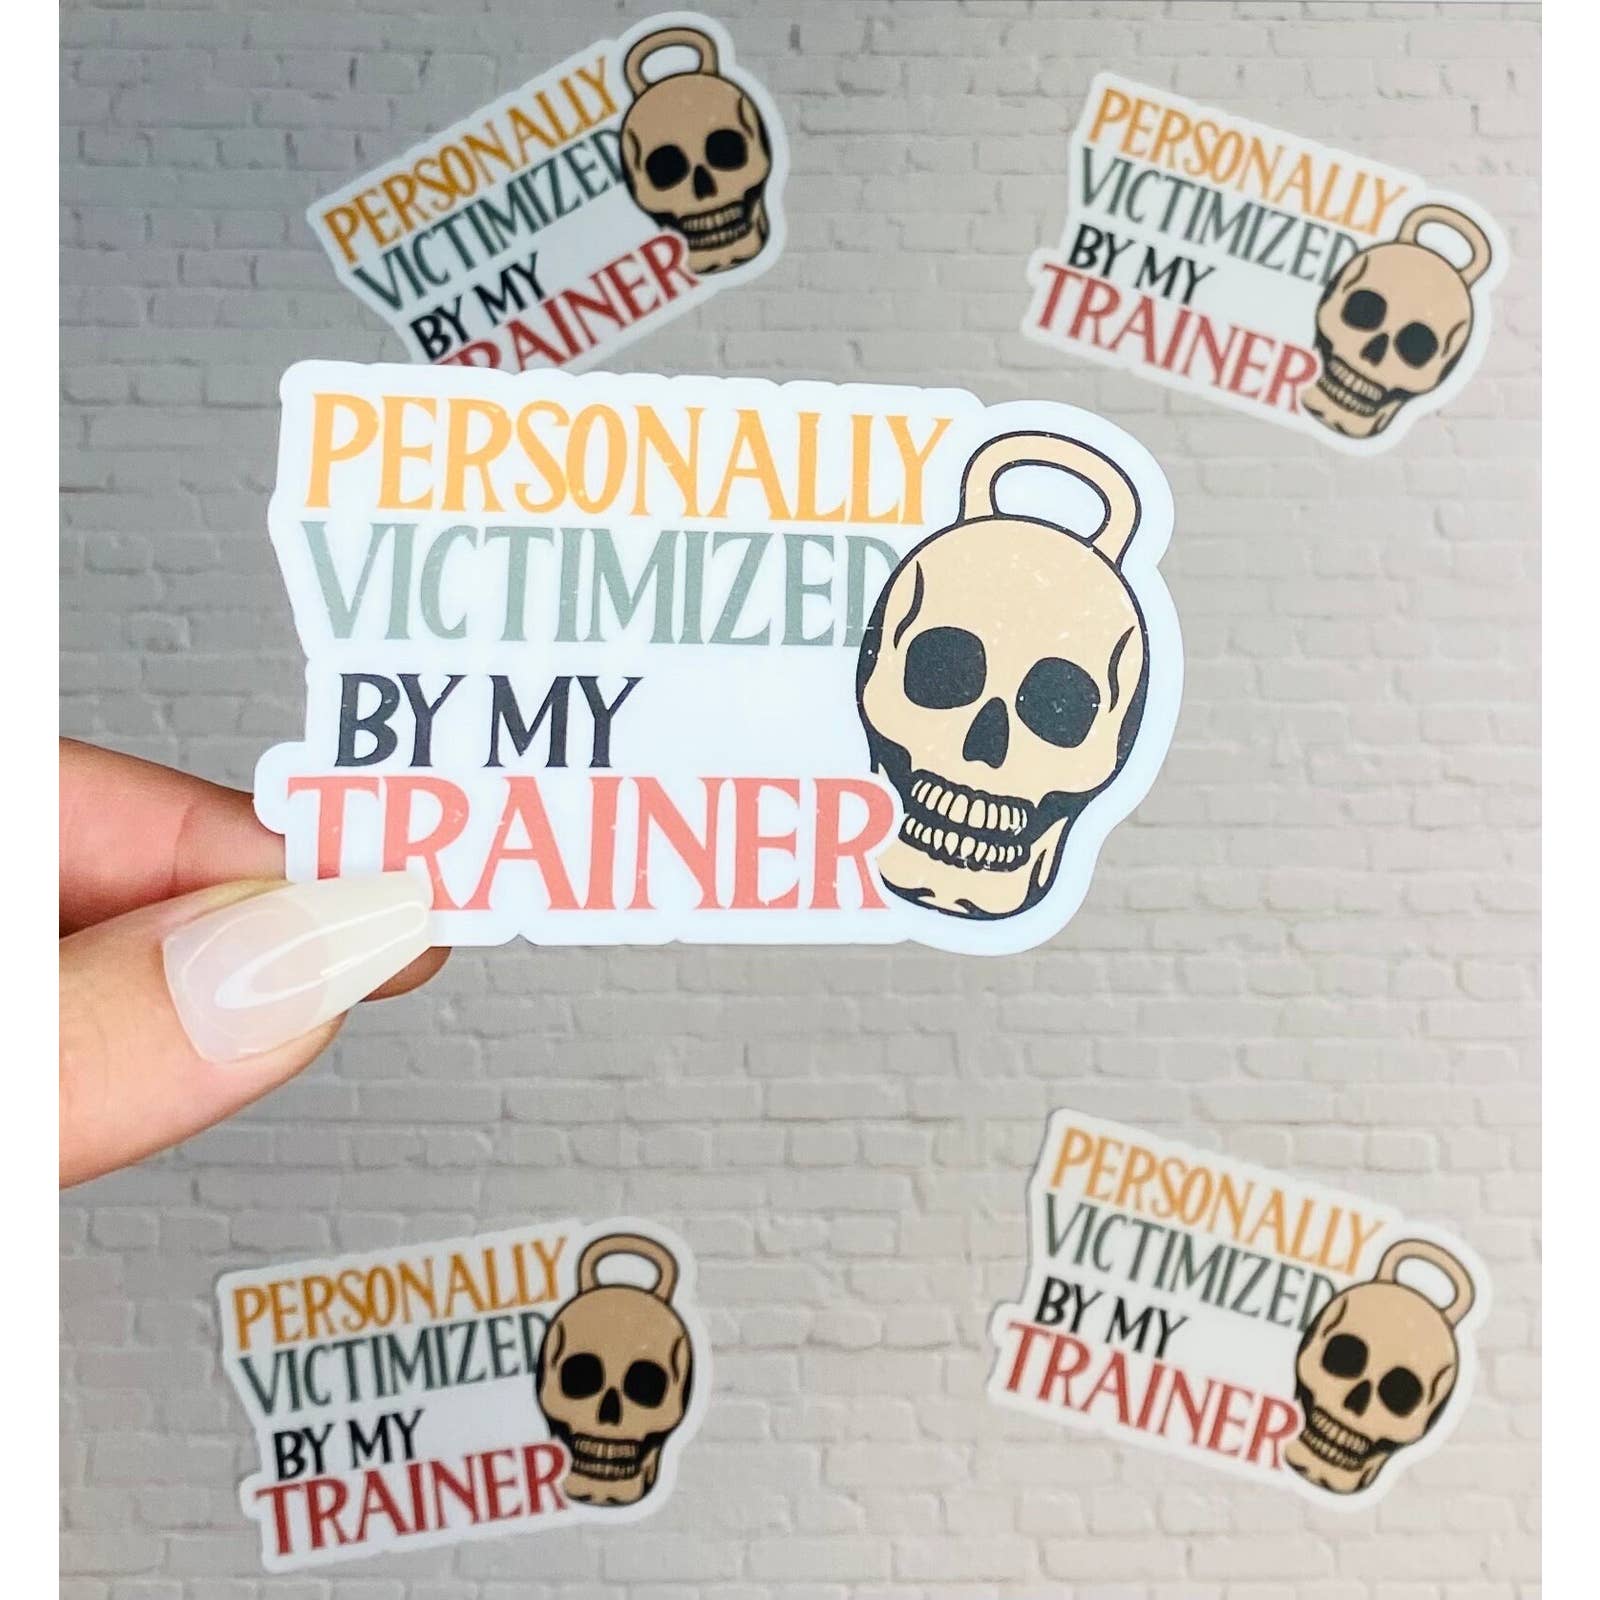 Personal Trainer Sticker - Personally Victimized By My Trainer - Funny Skull Kettlebell Sticker for Gym Water Bottle